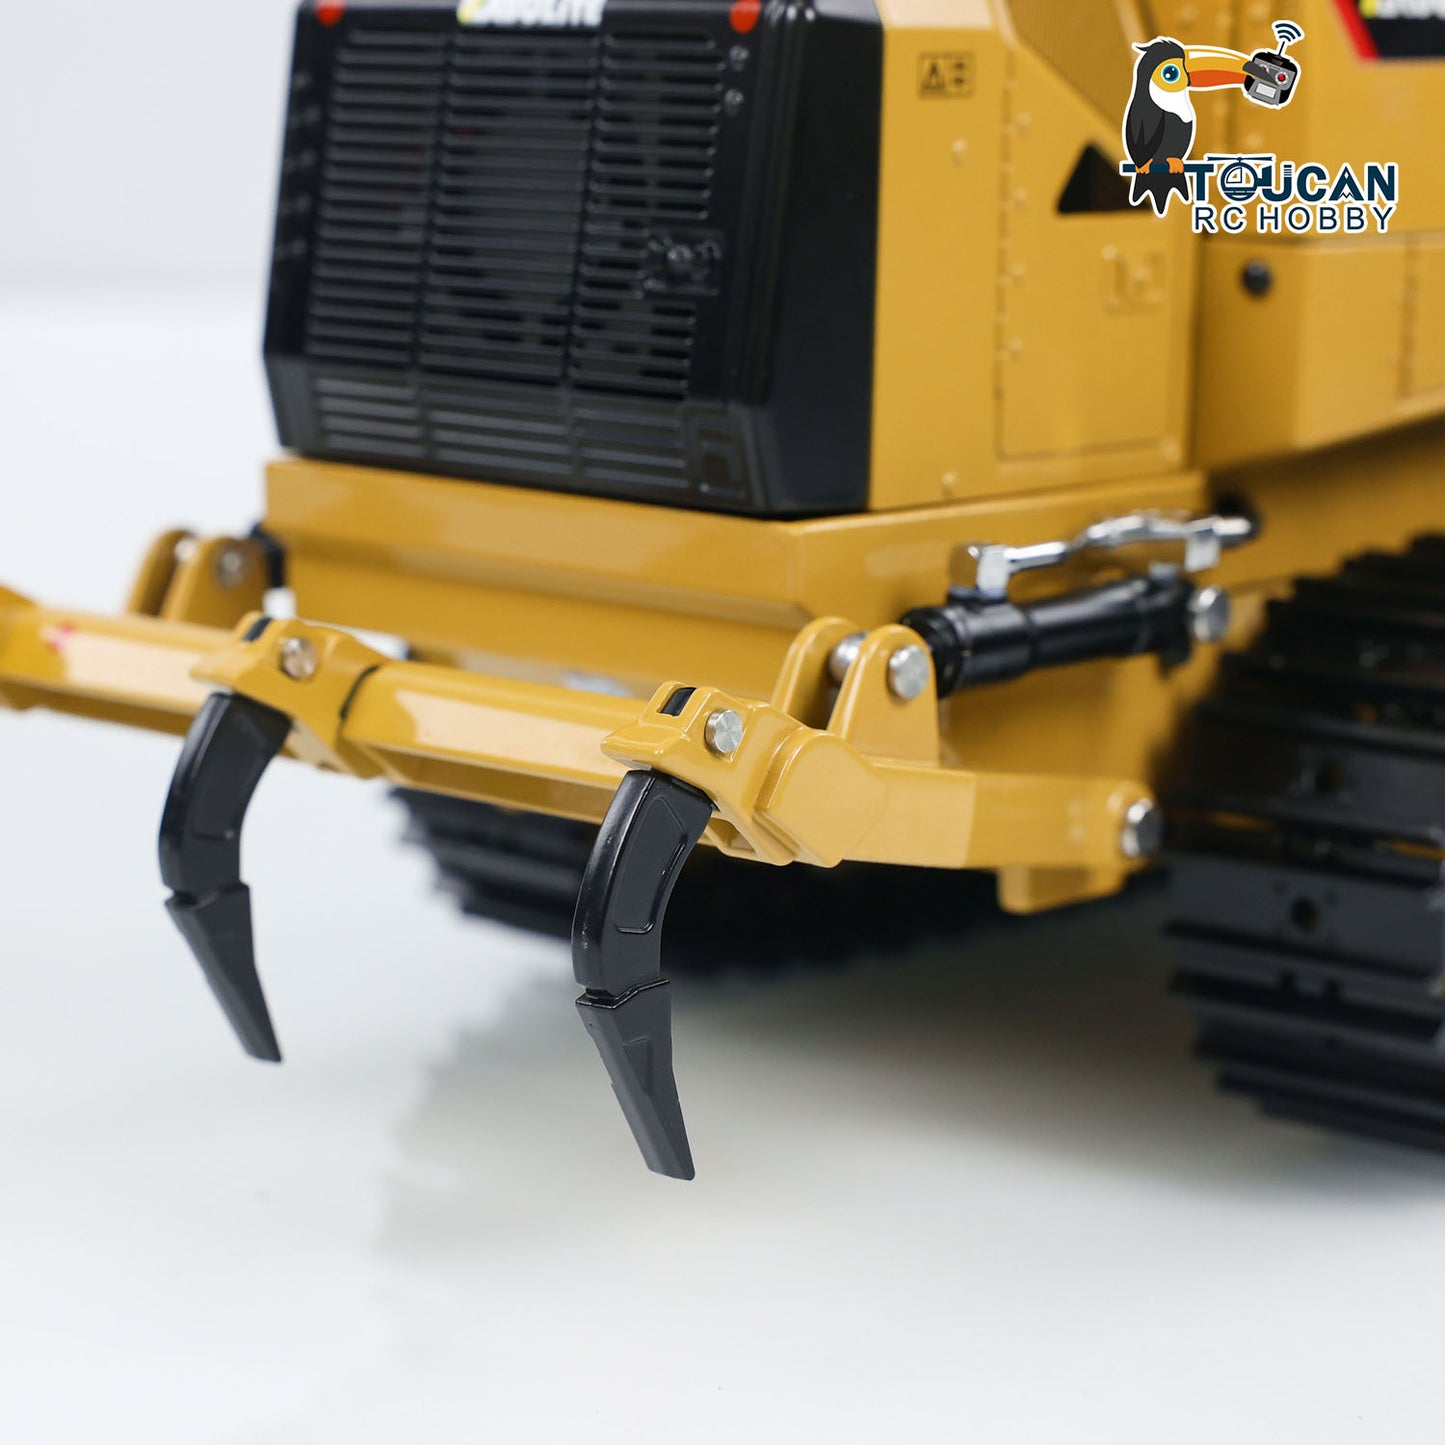 Kabolite 1/16 Hydraulic RC Loader K963-100 Remote Control Construction Vehicles